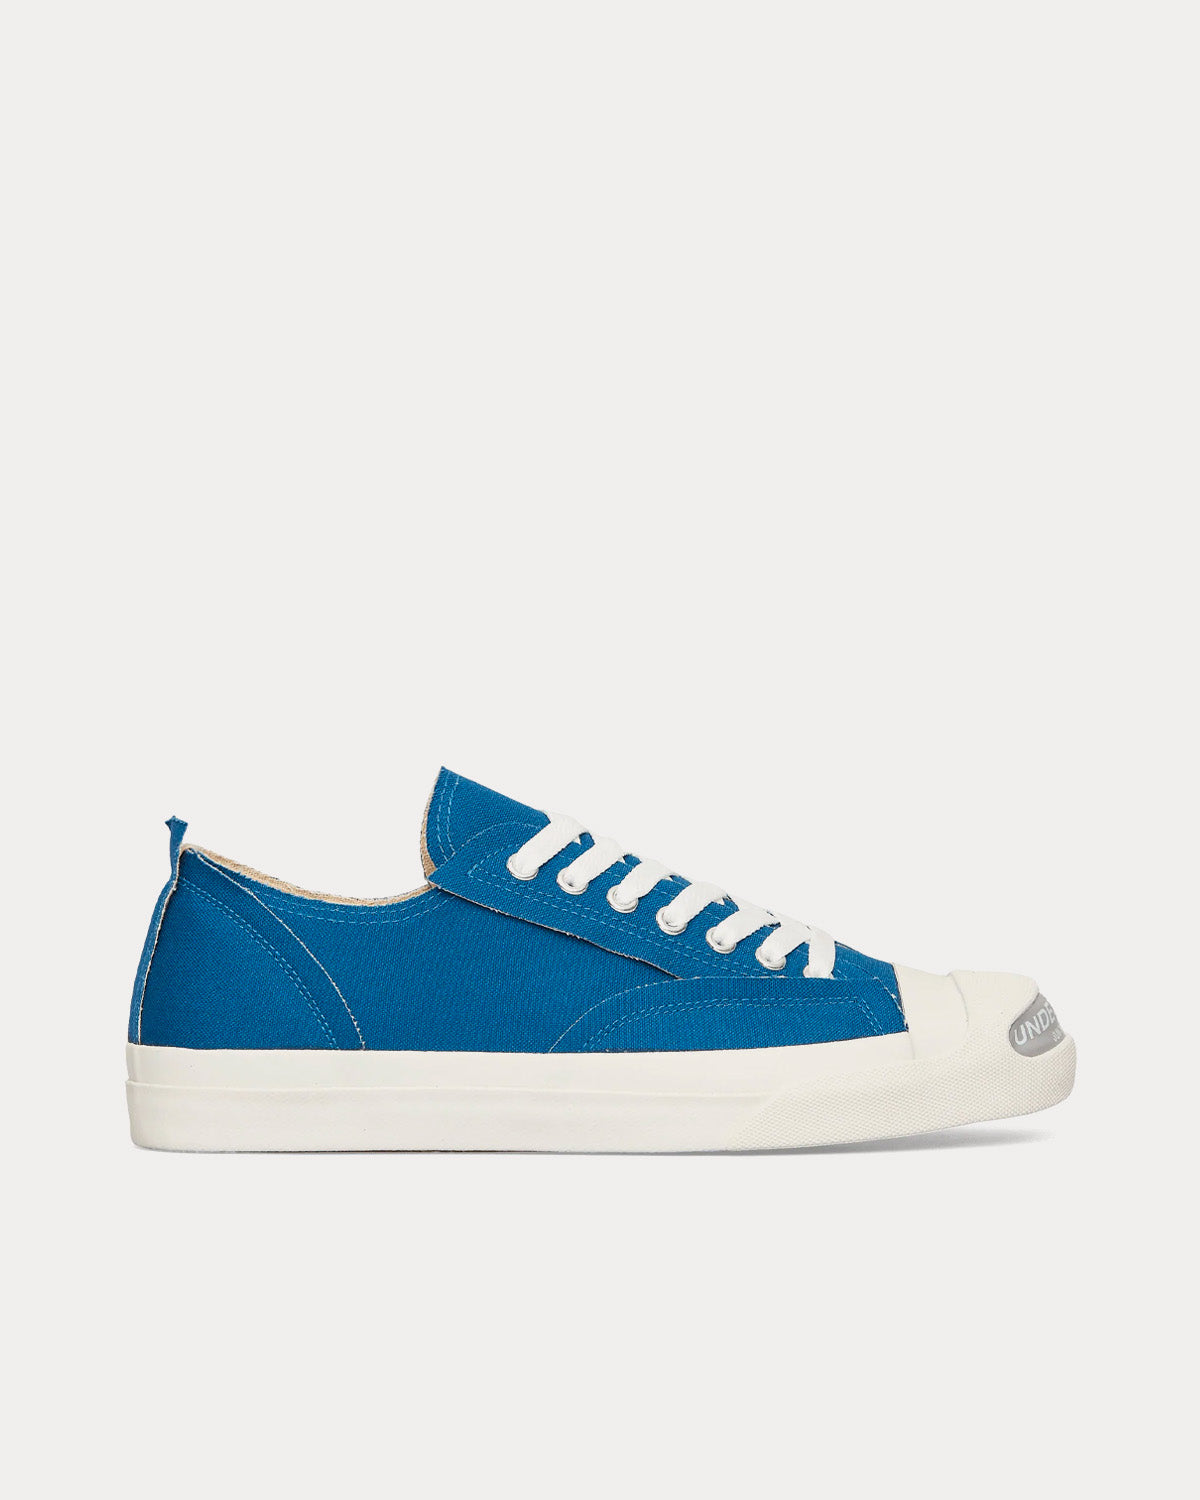 Undercover - Canvas Blue Low Top Sneakers